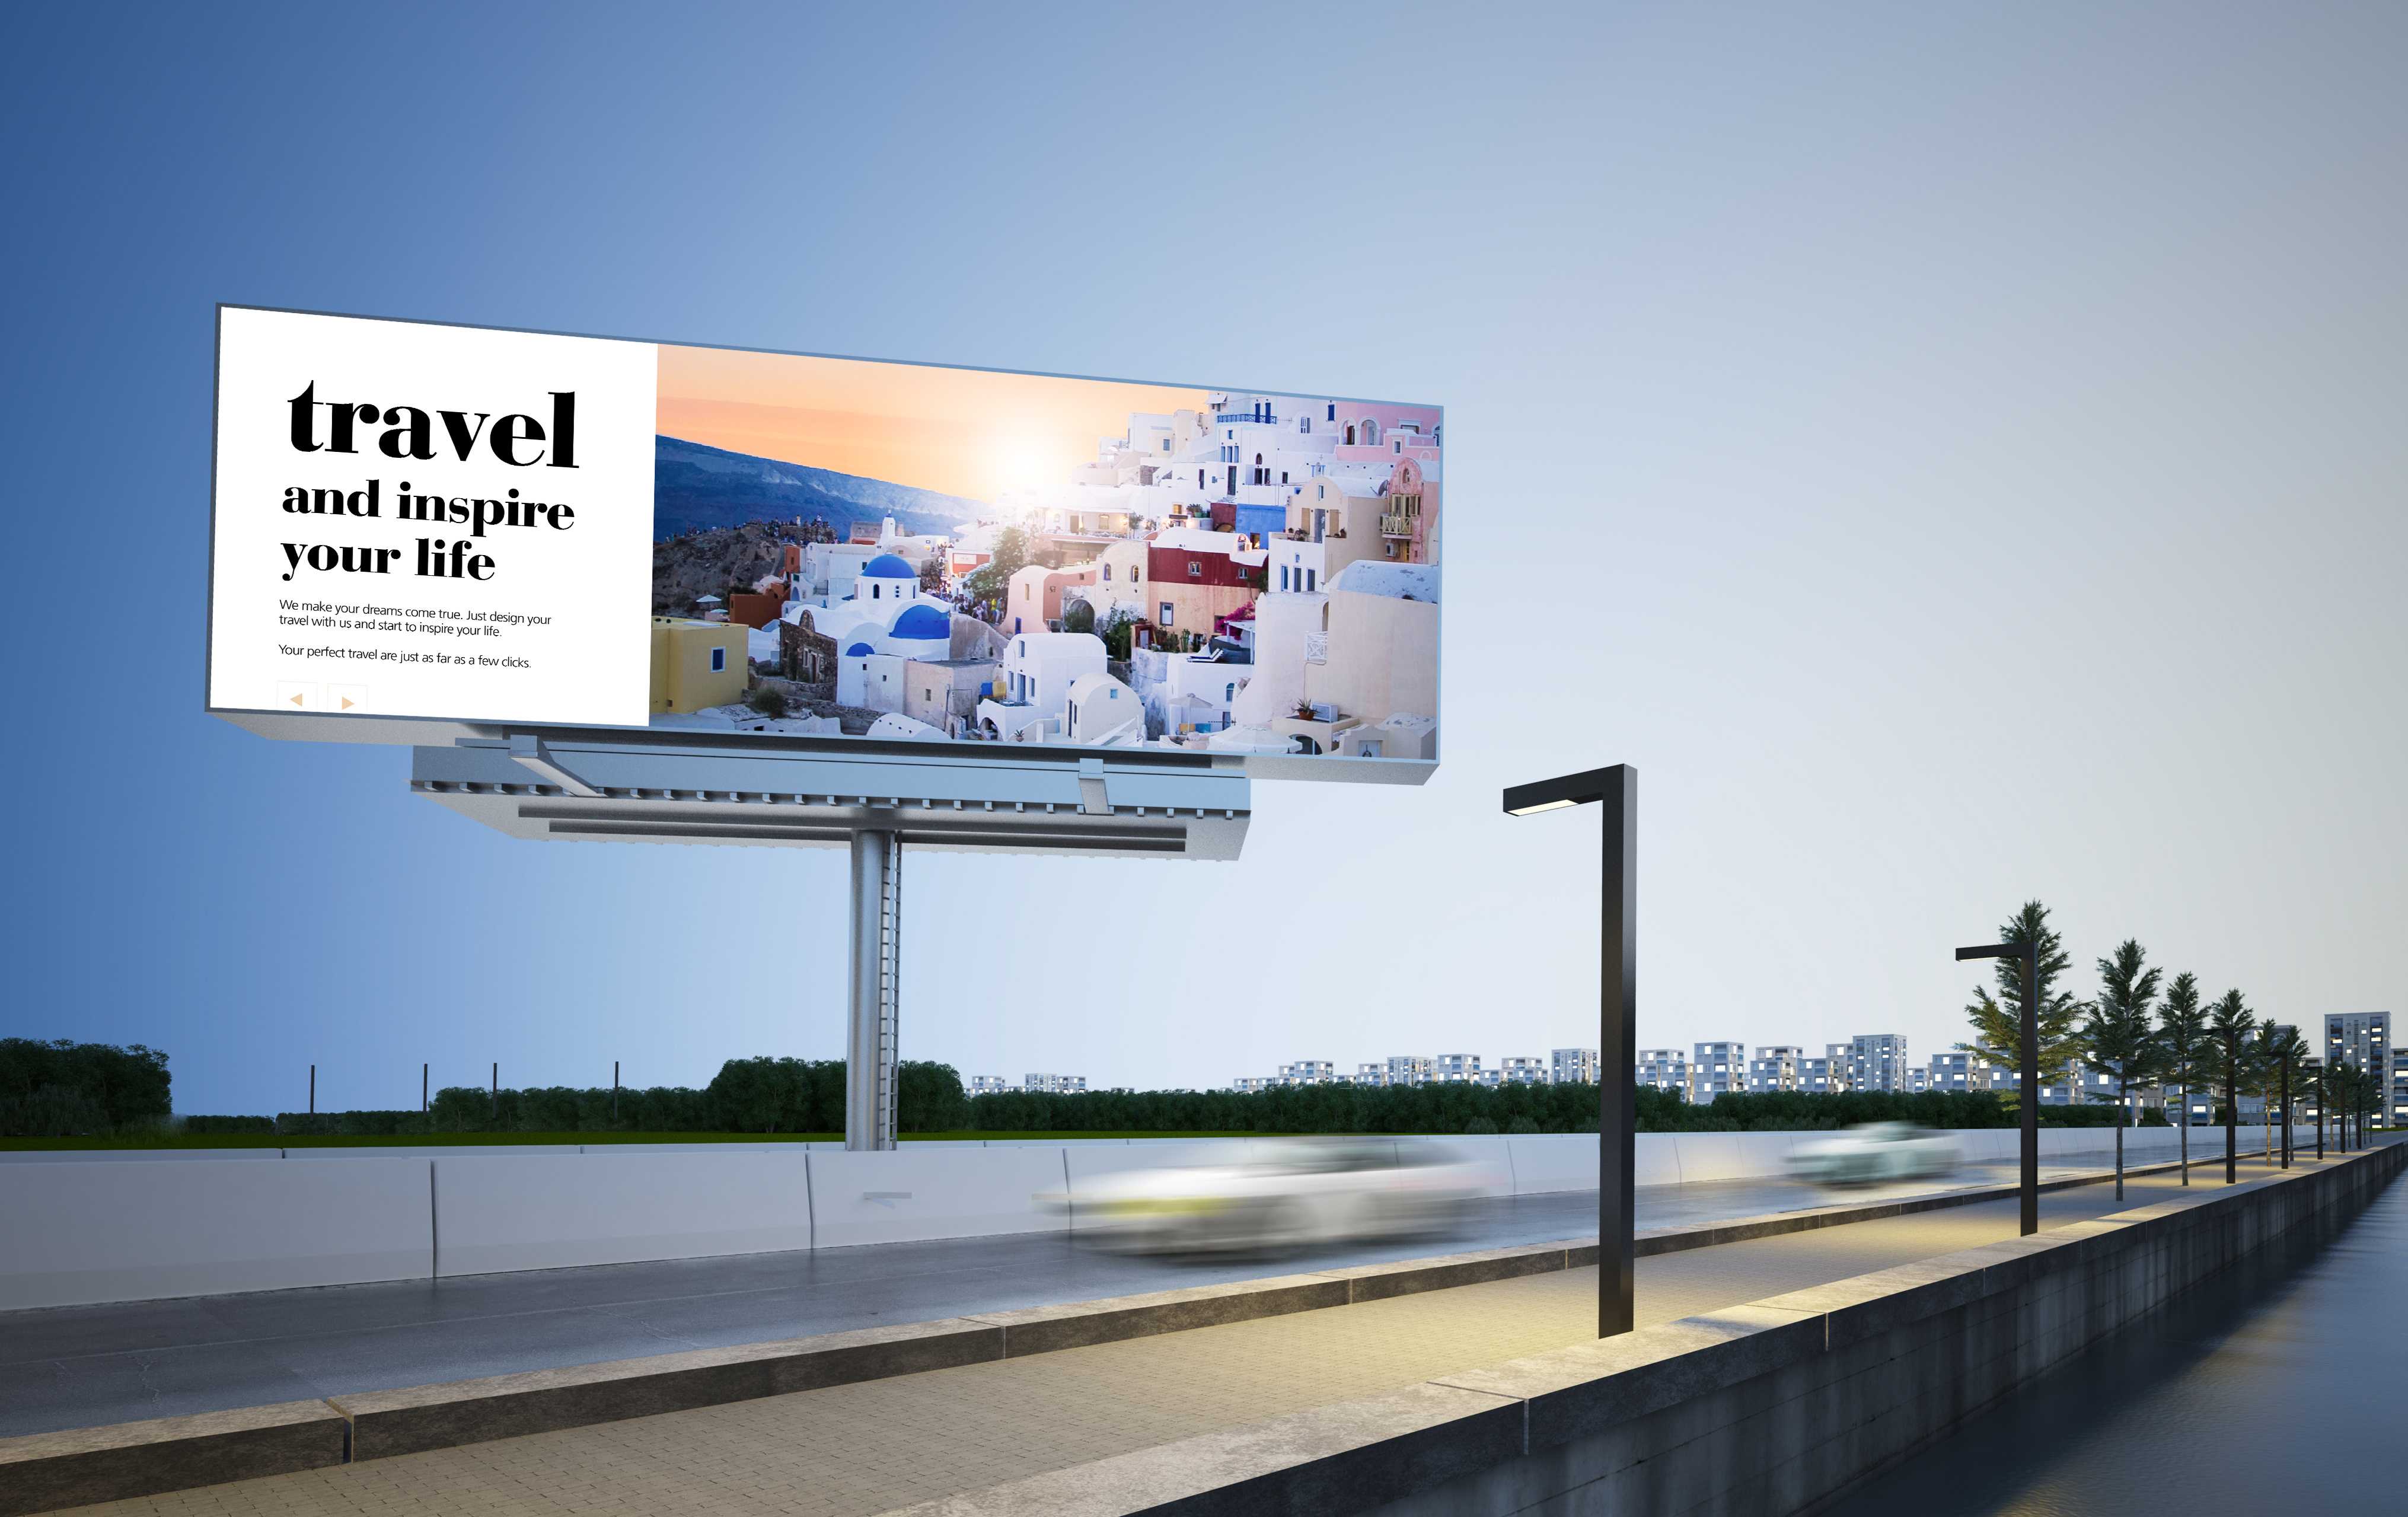 Billboard showing travel advertising campaign